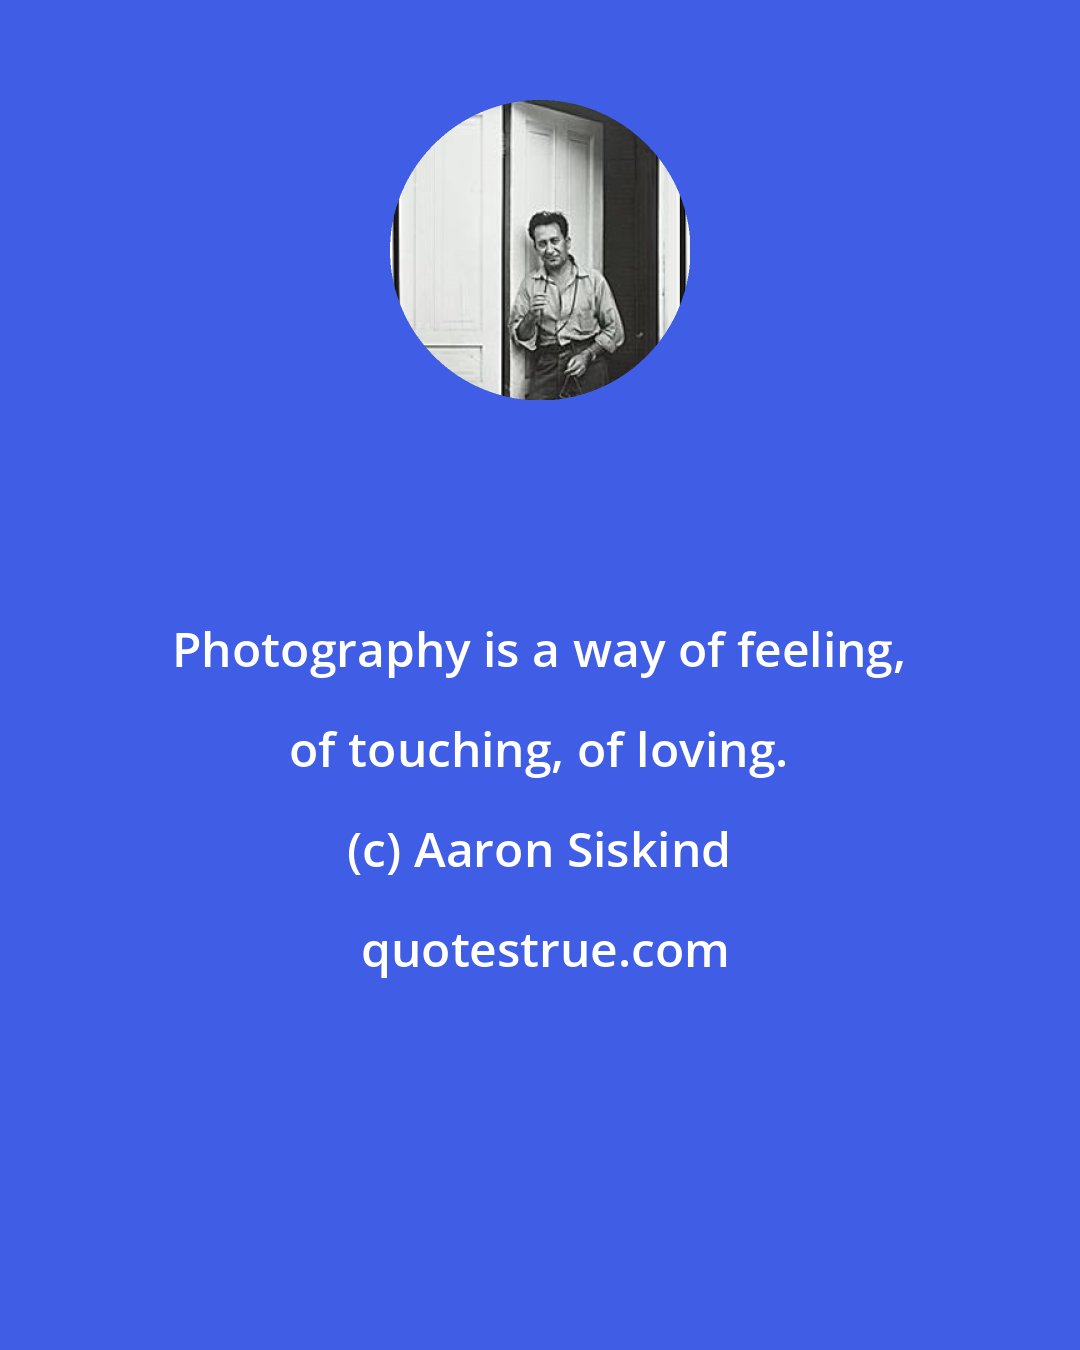 Aaron Siskind: Photography is a way of feeling, of touching, of loving.